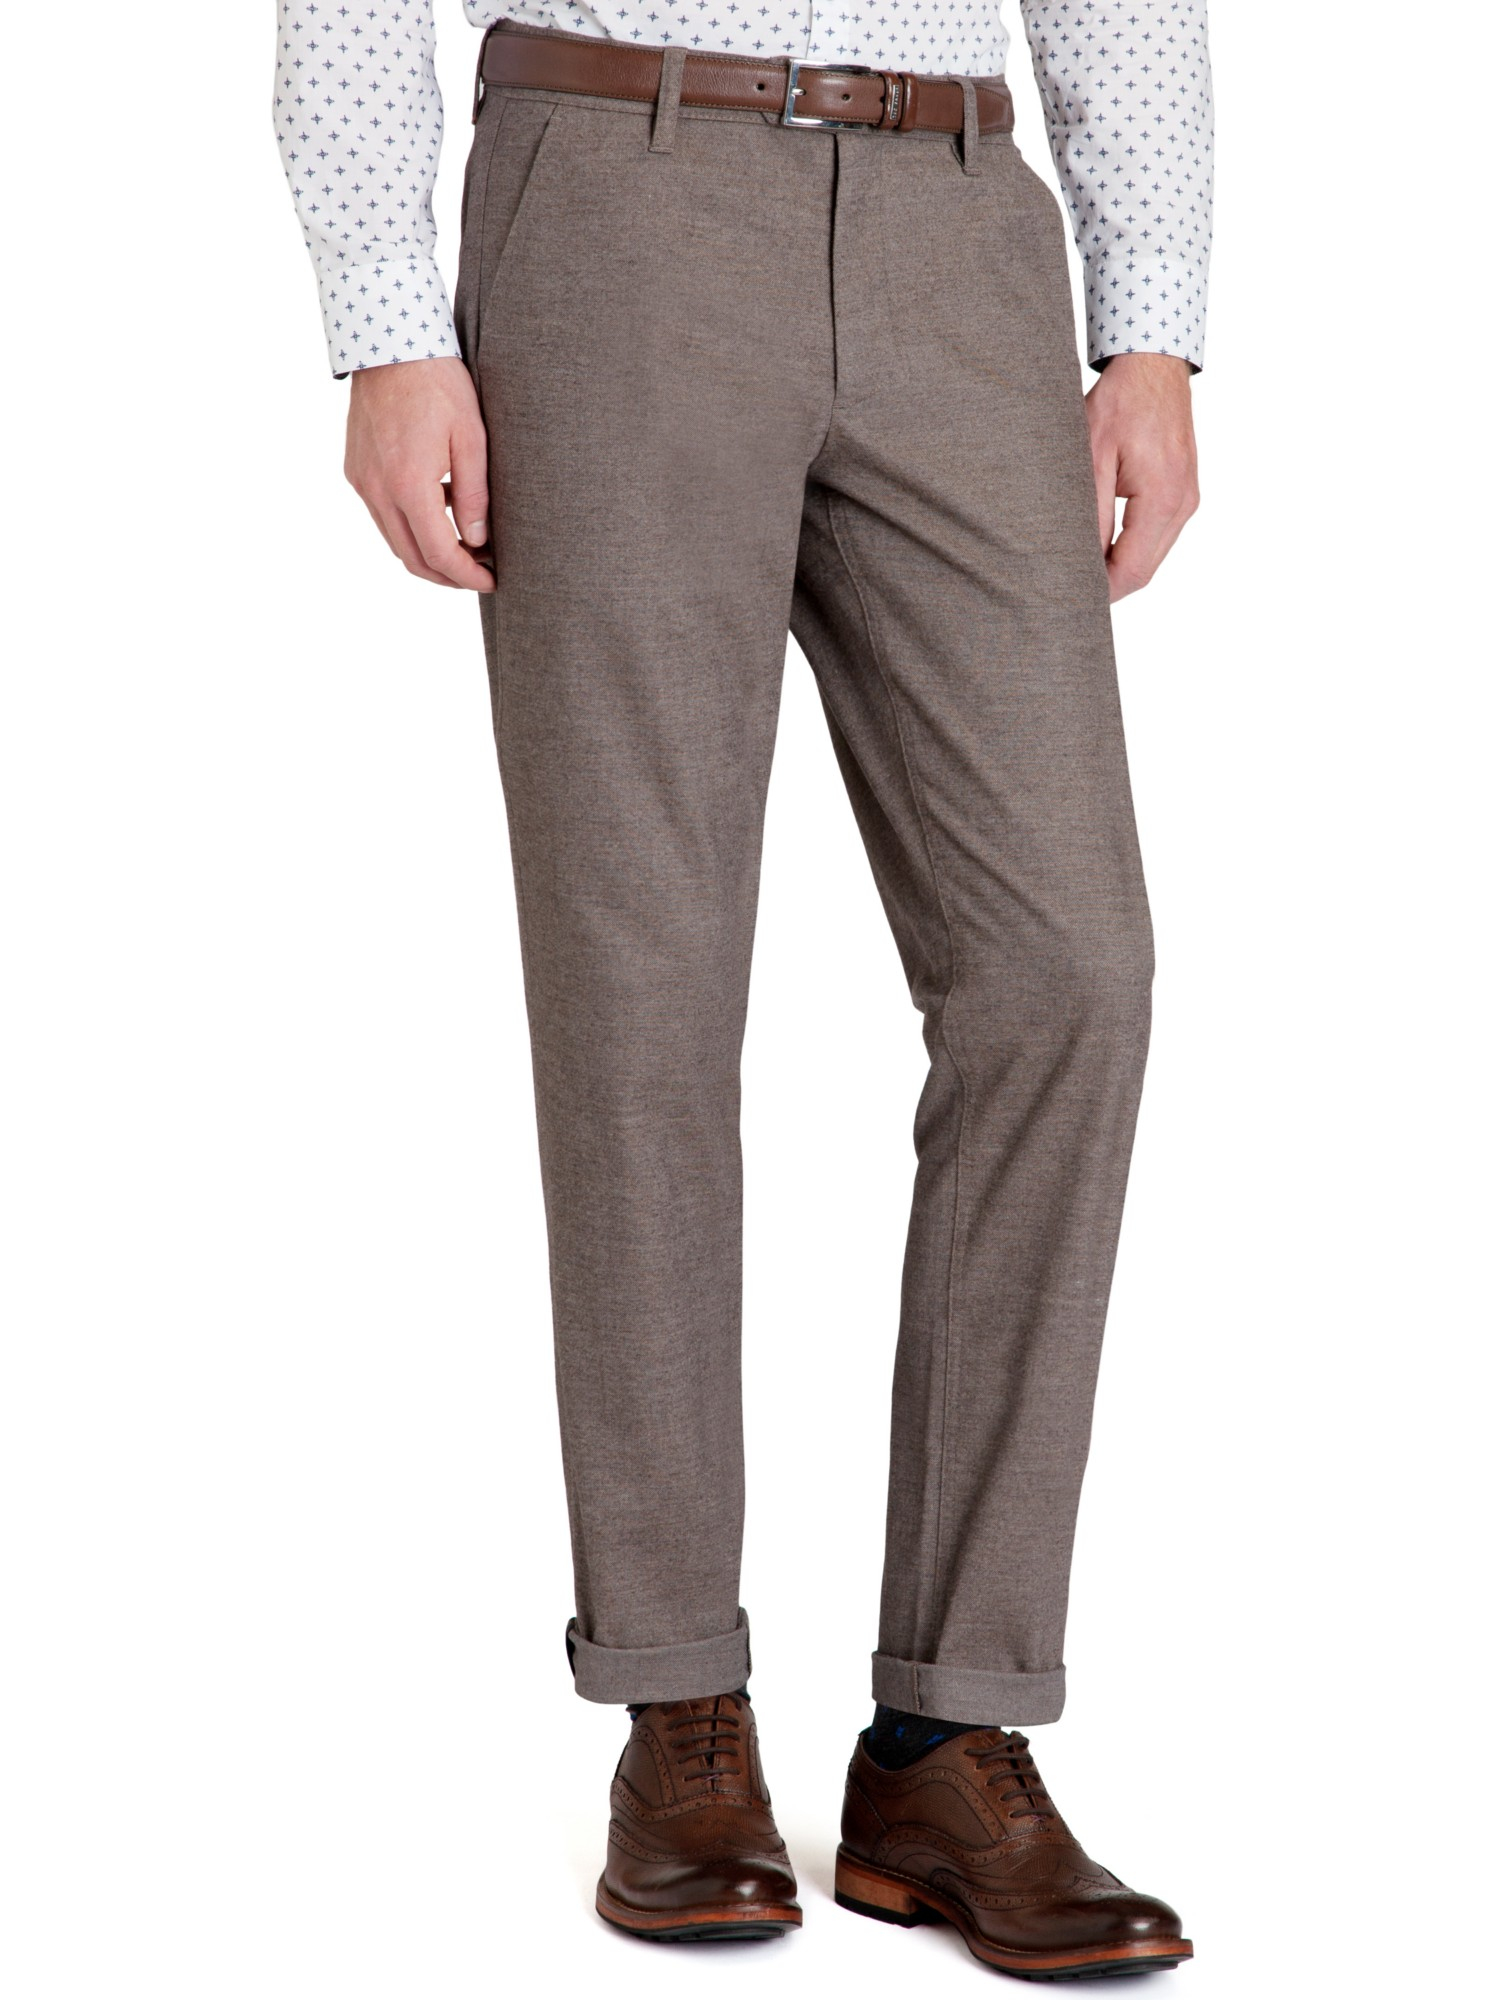 Ted baker Slimly Slim Fit Brushed Cotton Trousers in Beige for Men ...